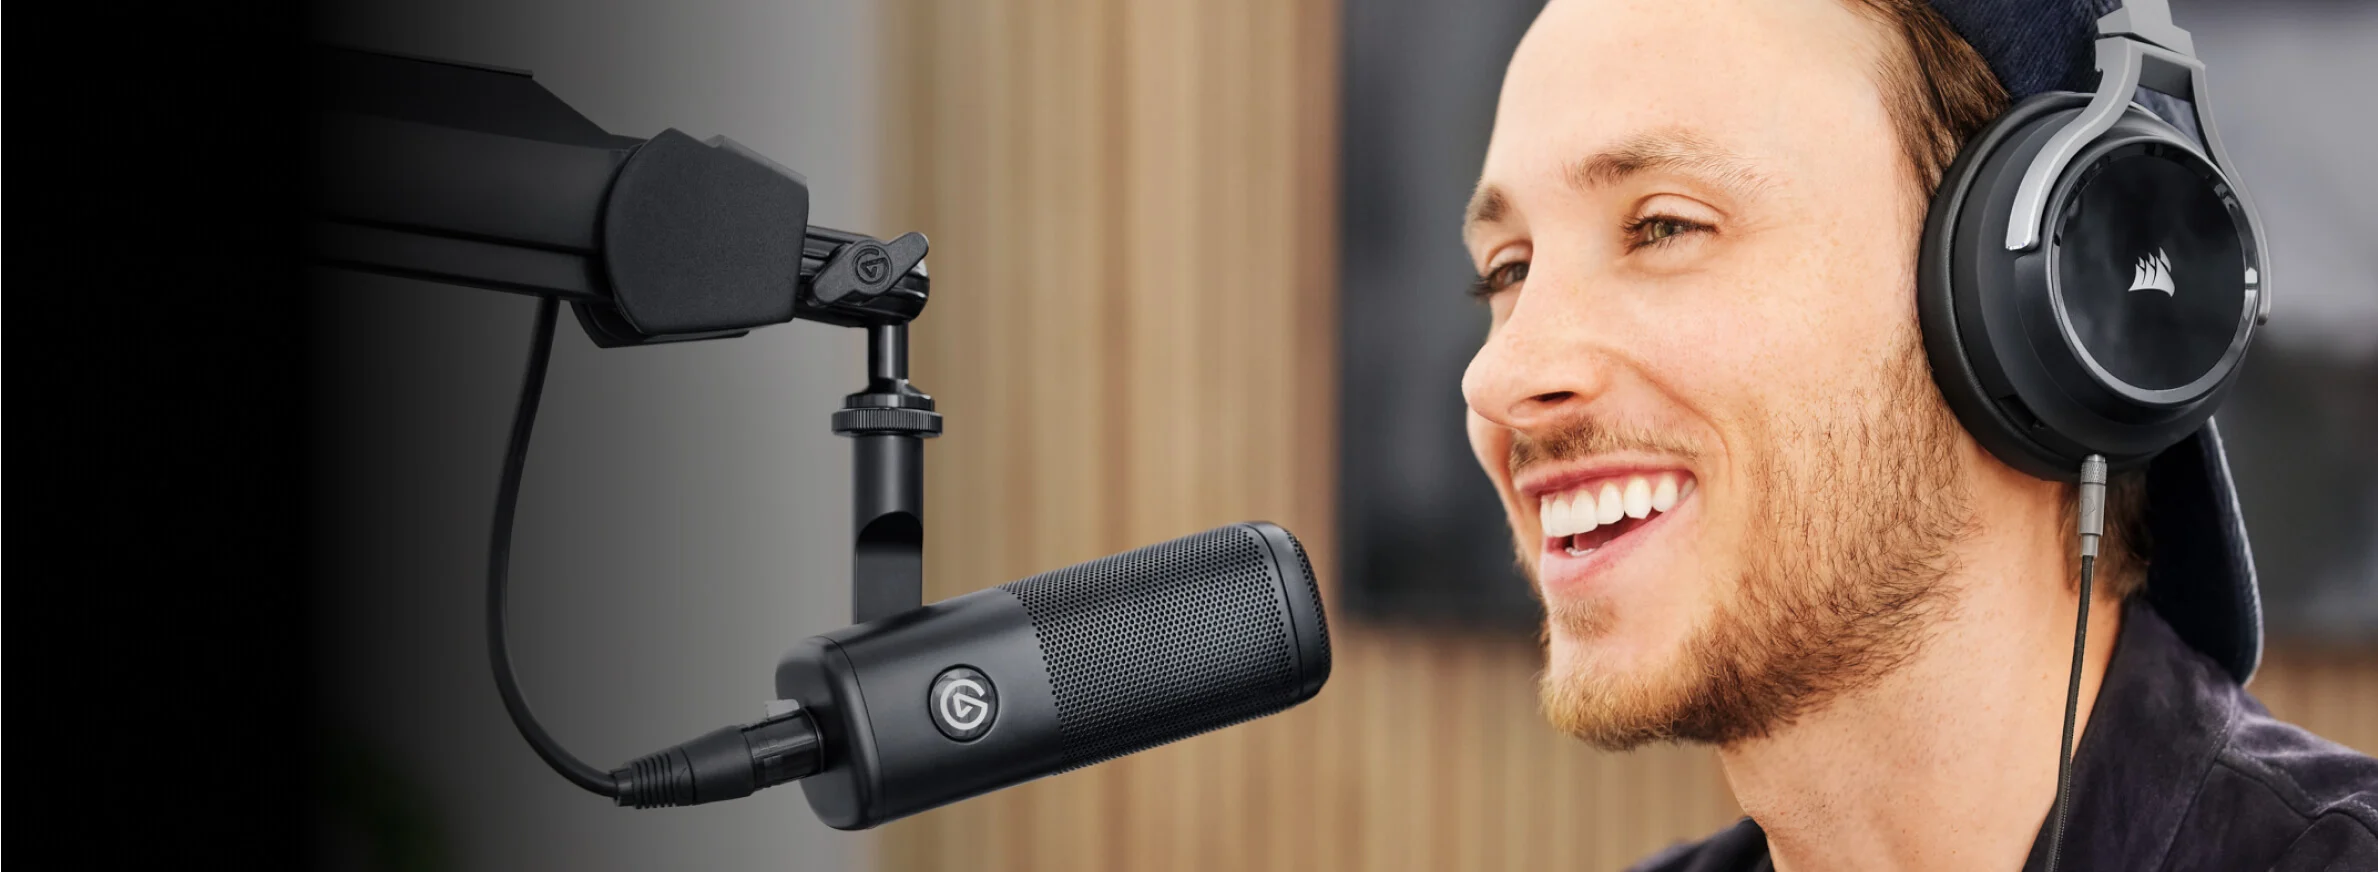 Podcasting creator laughs into wave dx dynamic mic